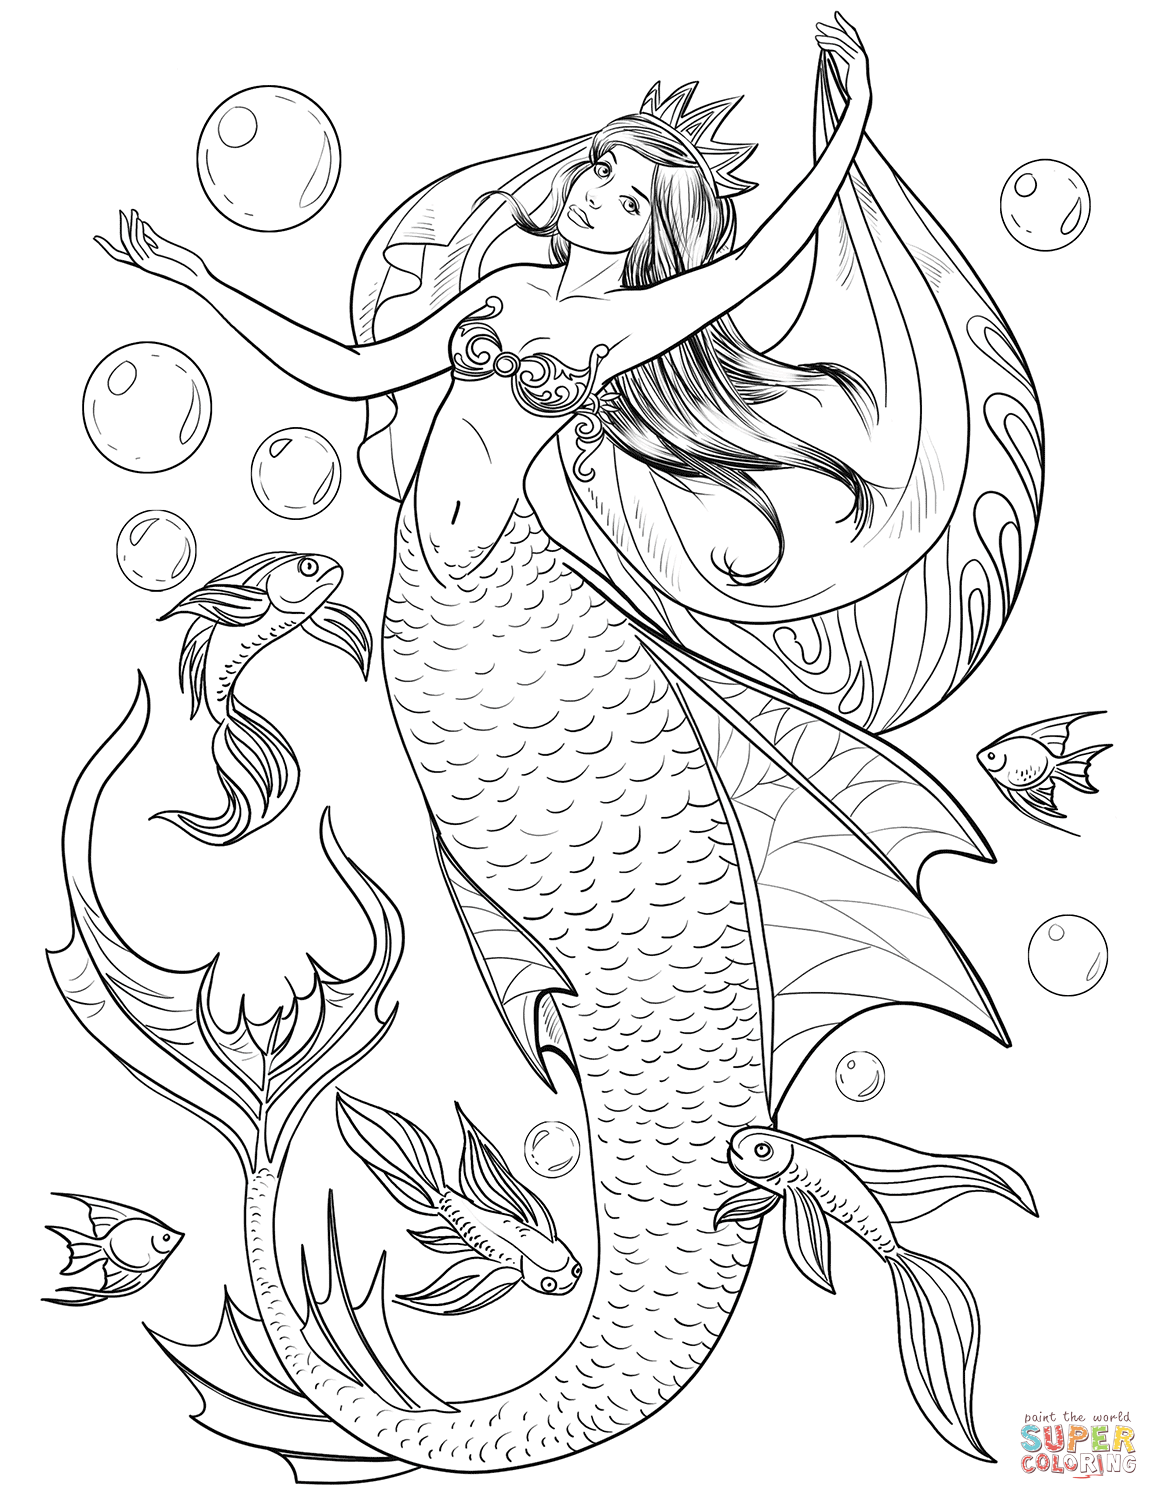 Mermaid coloring page free printable coloring pages